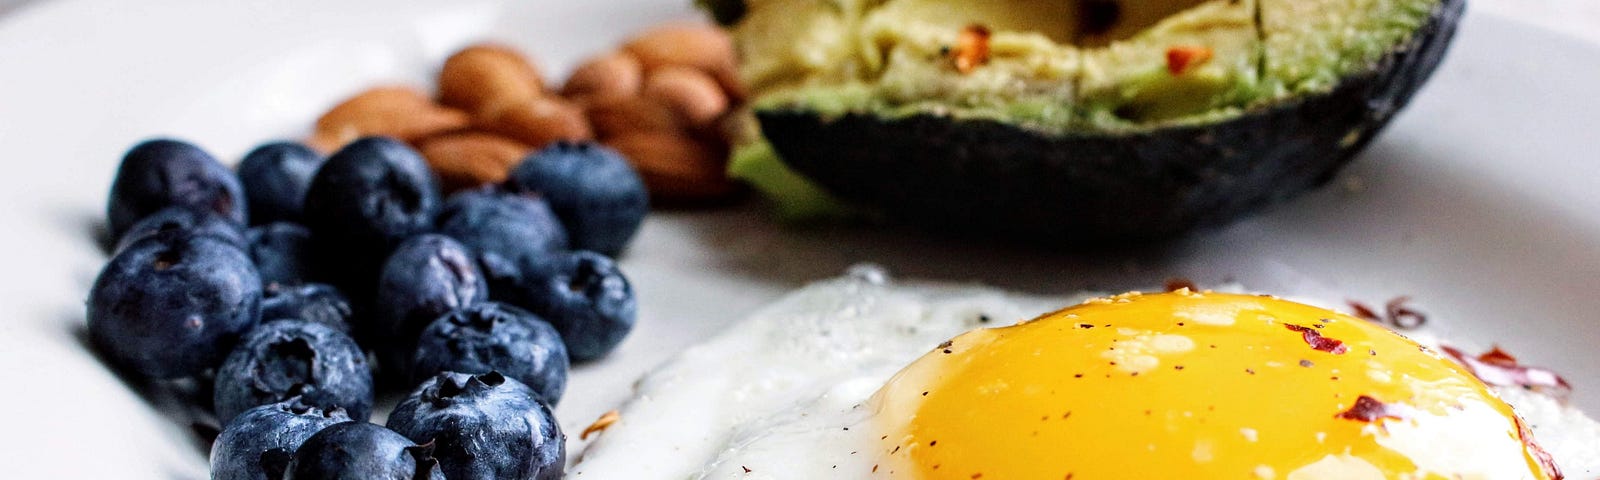 Fried egg, avocado, almonds and blueberries on plate